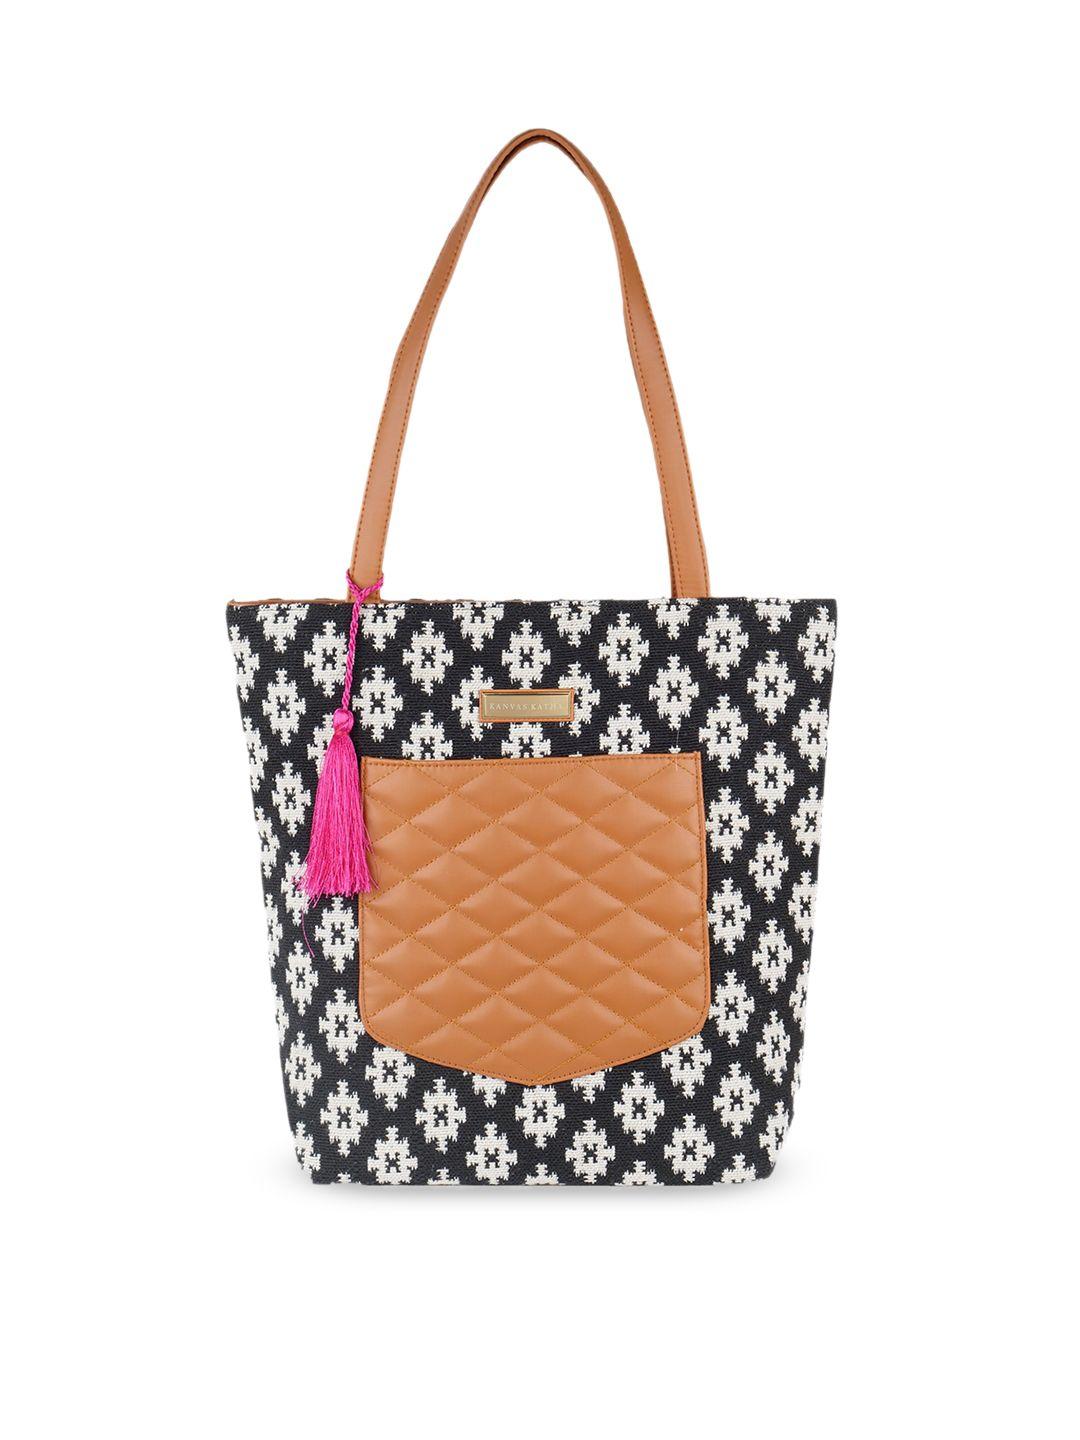 kanvas katha floral textured oversized shopper tote bag with quilted